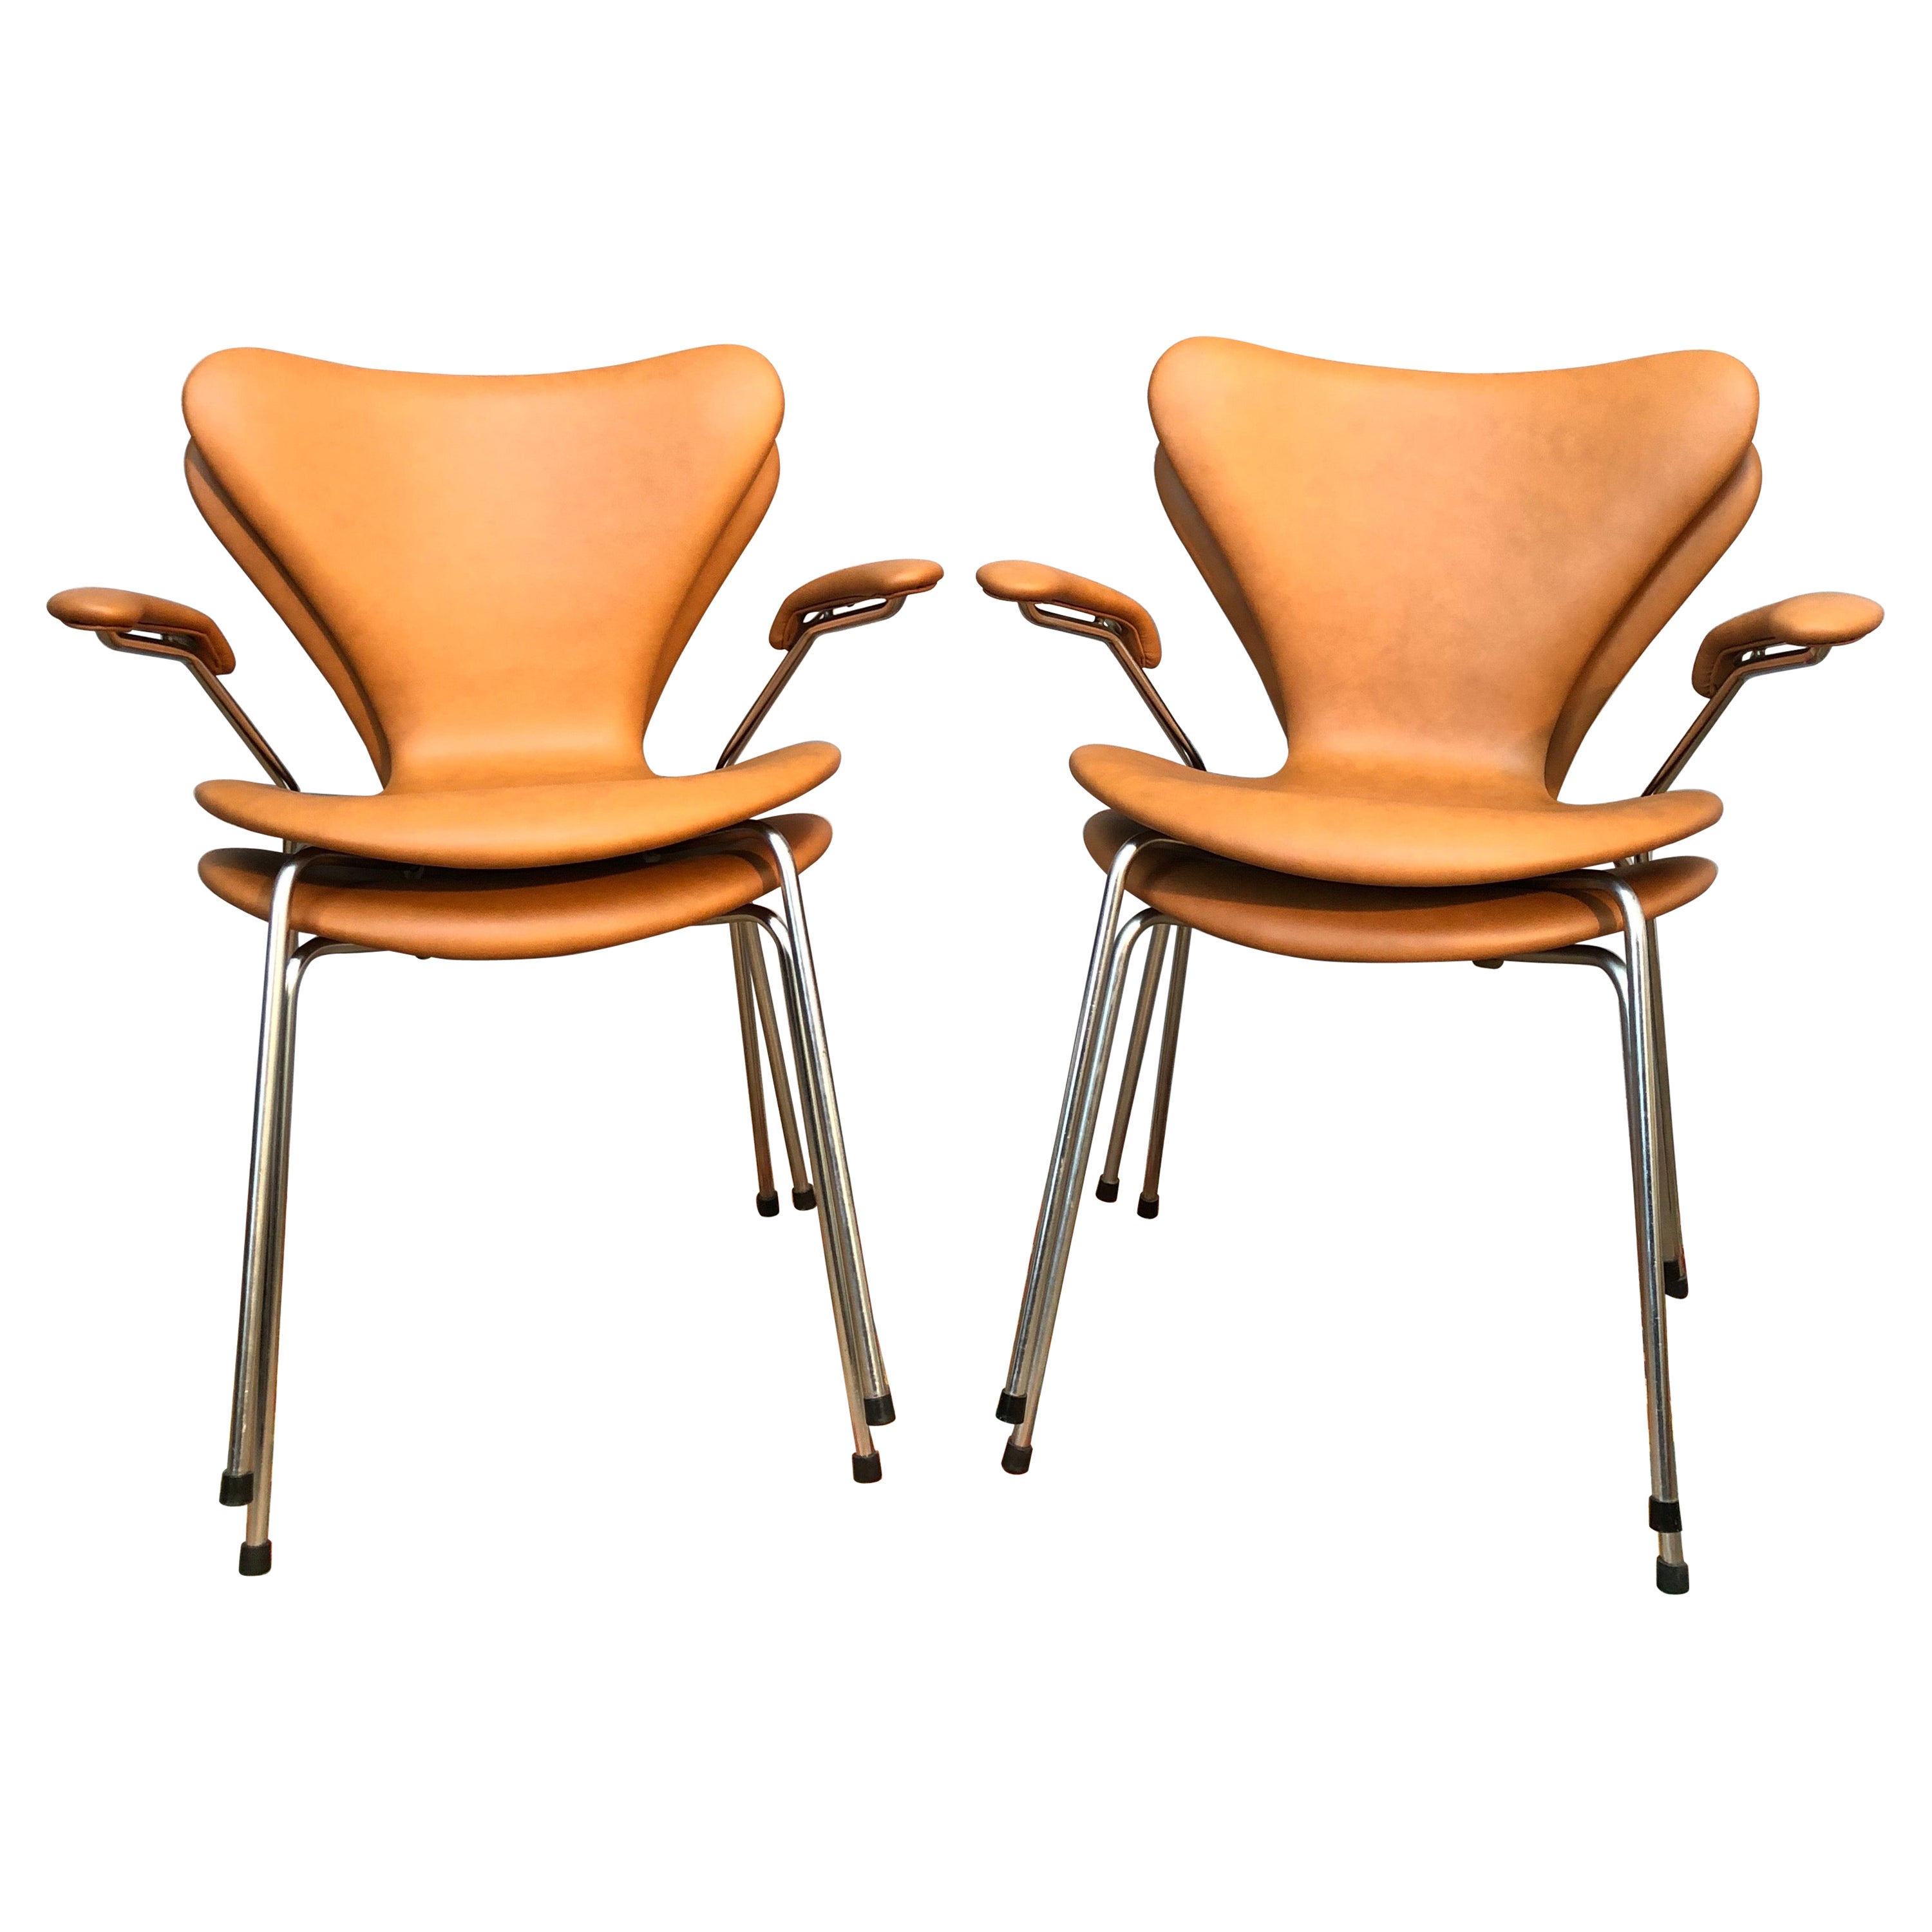 4 Iconic Vintage Arne Jacobsen for Fritz Hansen Chairs 3107/3207 in Leather